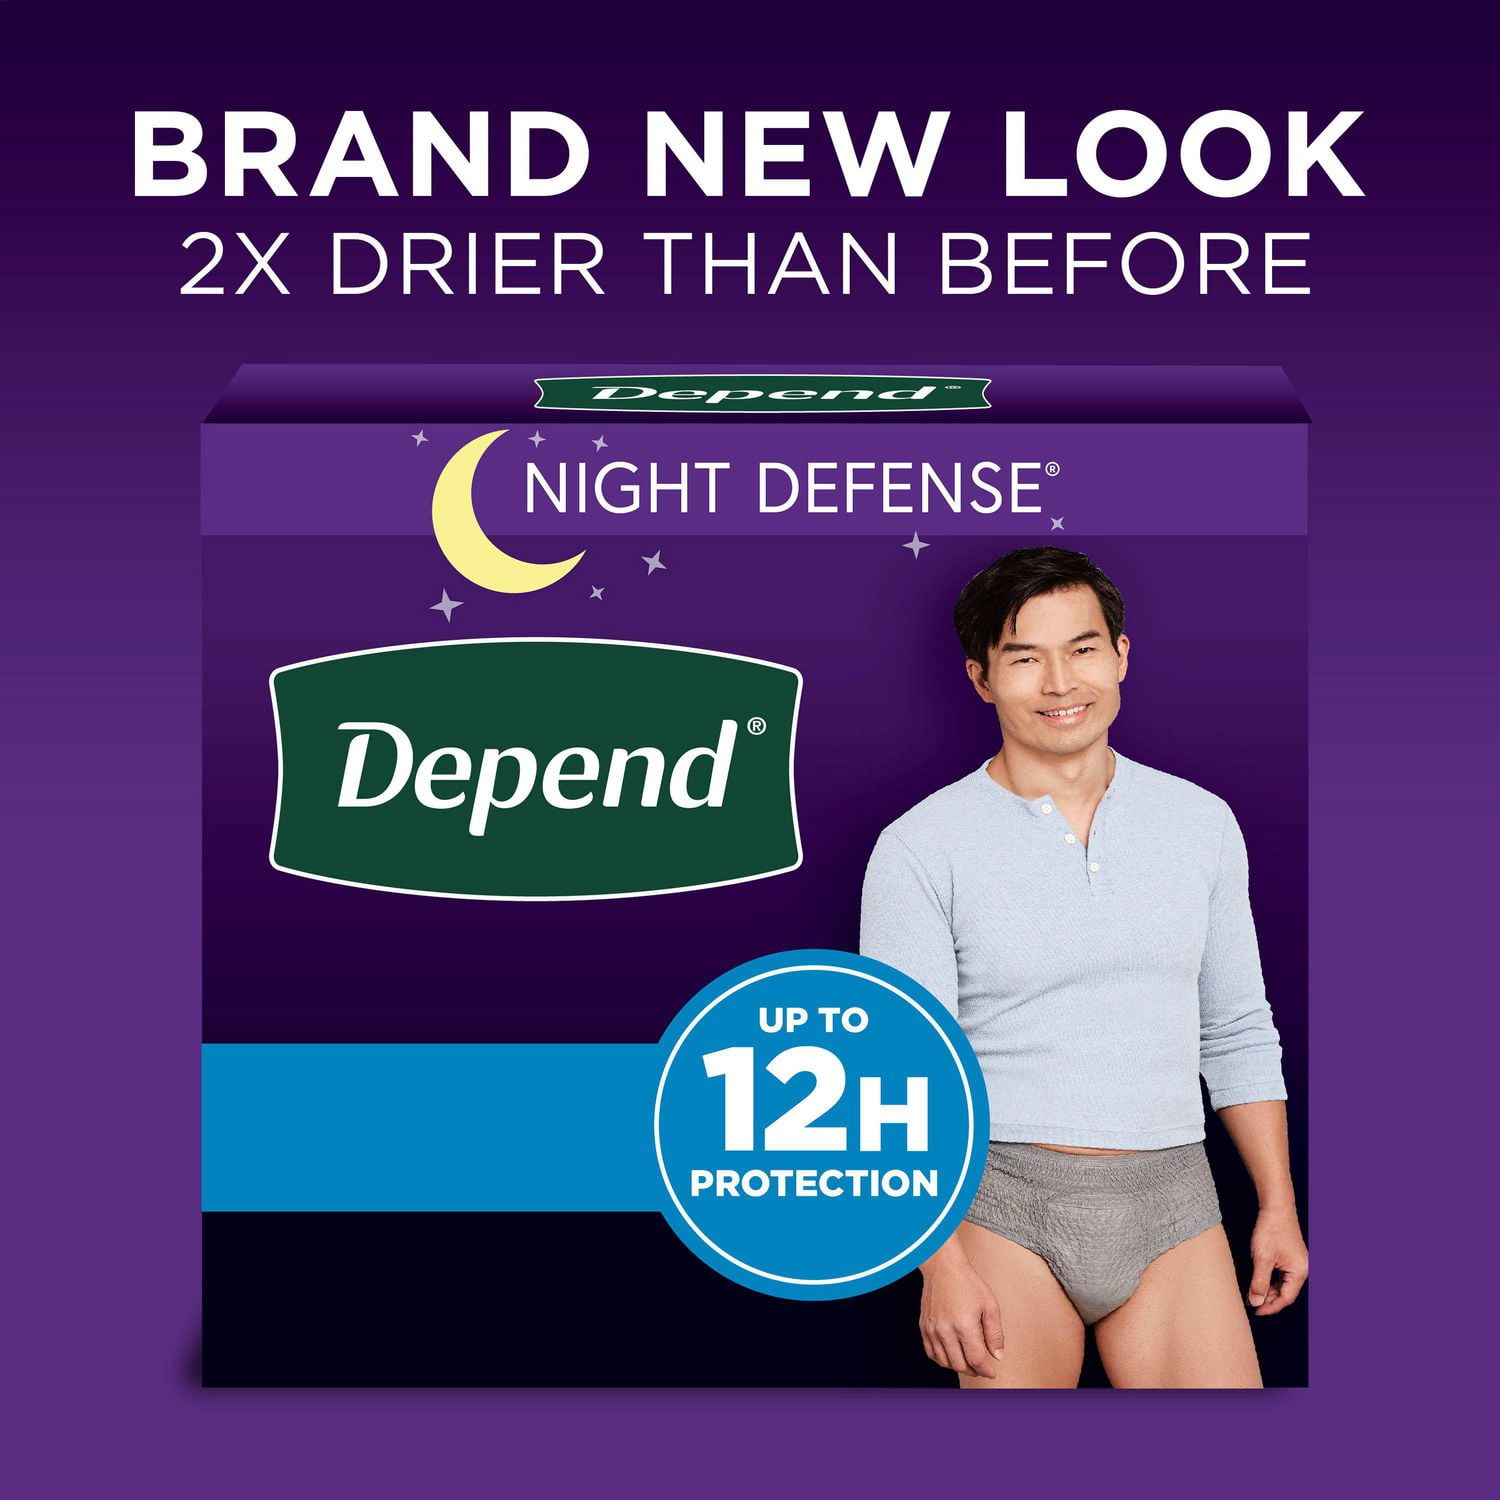 Adult Diapers Industry Overview - Brands, Manufacturers, Pull ups, Turkey